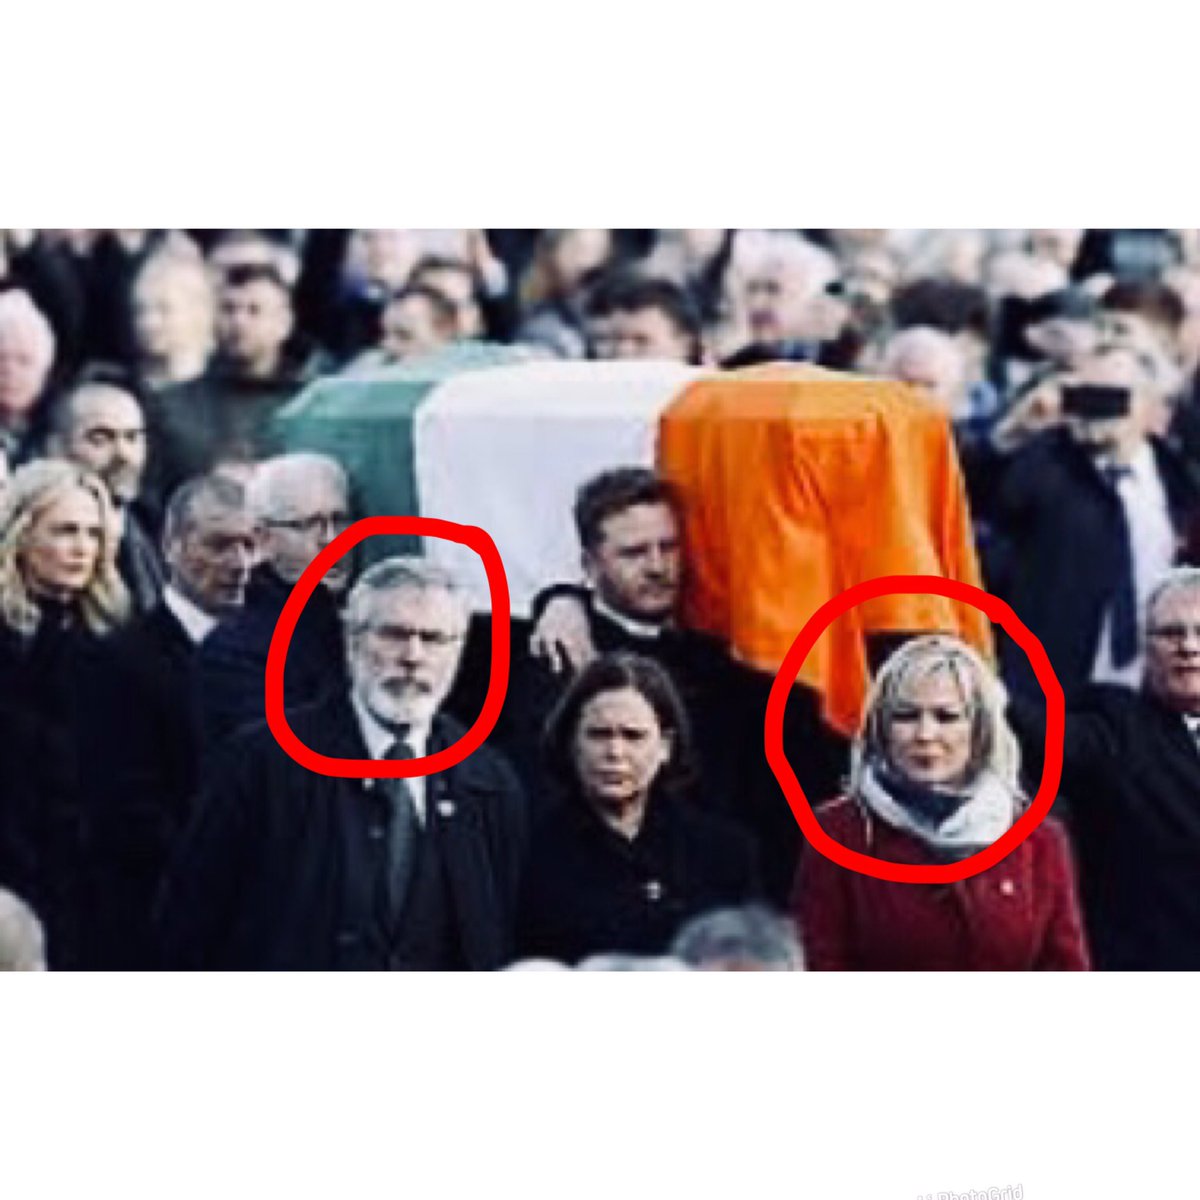 #Sturgeon’s ‘esteemed’ leader friend #MichelleONeill seems very fond of taking an active front row position at #IRA funerals. Note whose always behind her #GerryAdams...leopards never change their spots.  Do we want this influence at the seat of our ruling Administration NO,NO,NO